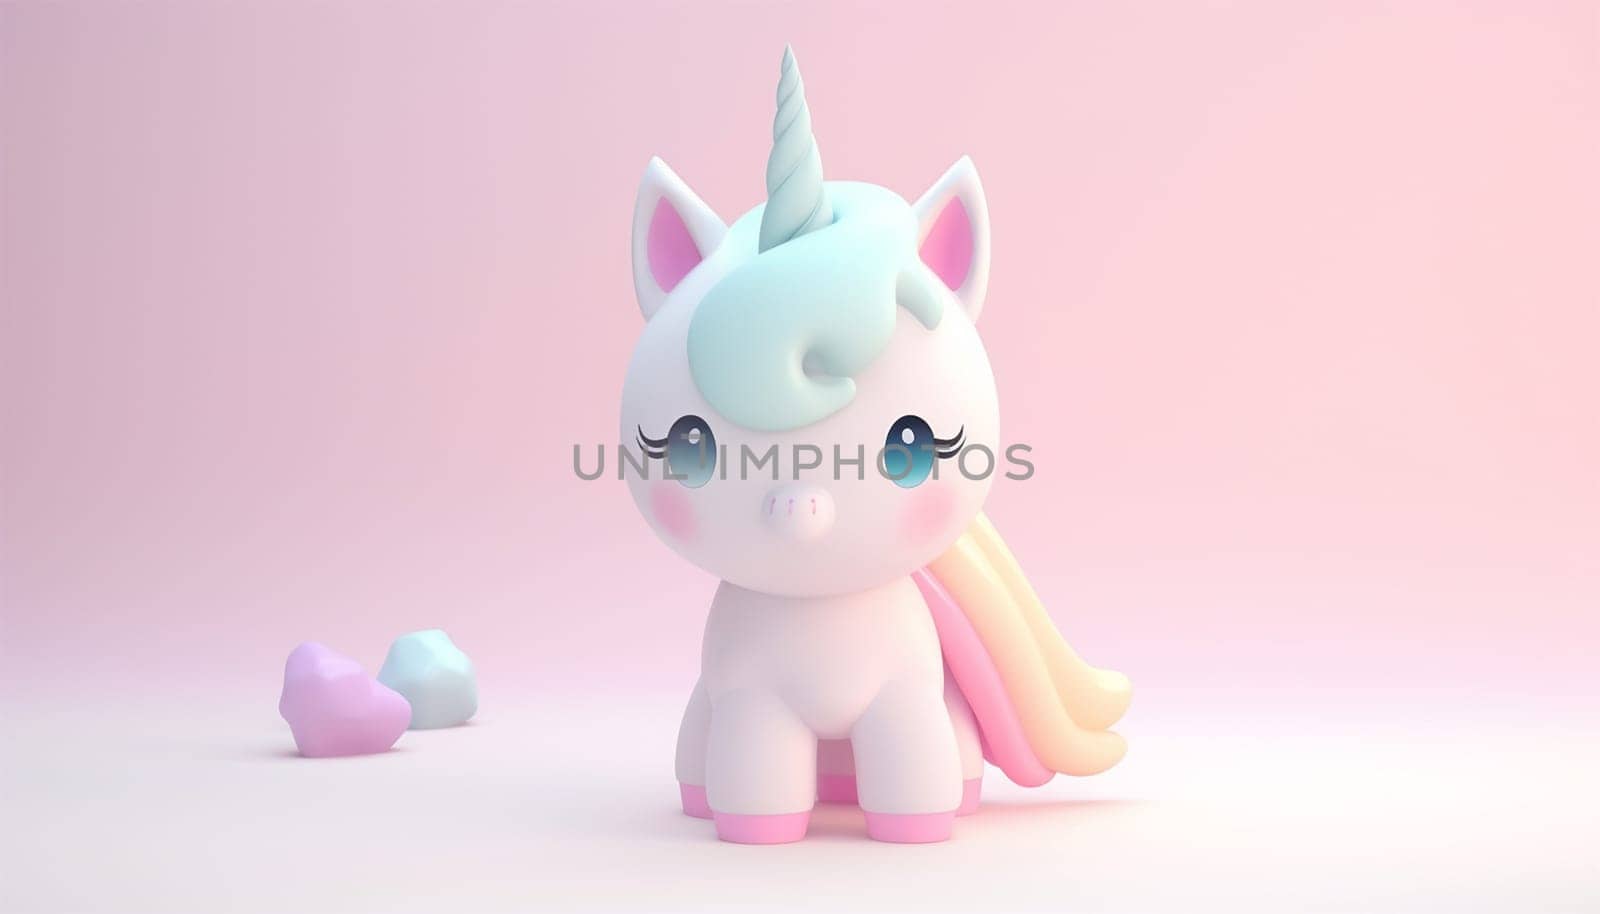 Cute unicorn pastel colored background. Magic fairy tale character unicorn 3d illustration for girls. Magic fairy tale unicorn print for clothes, stationery, books, goods. Toy Unicorn 3D character banner, background. Copy space by Annebel146